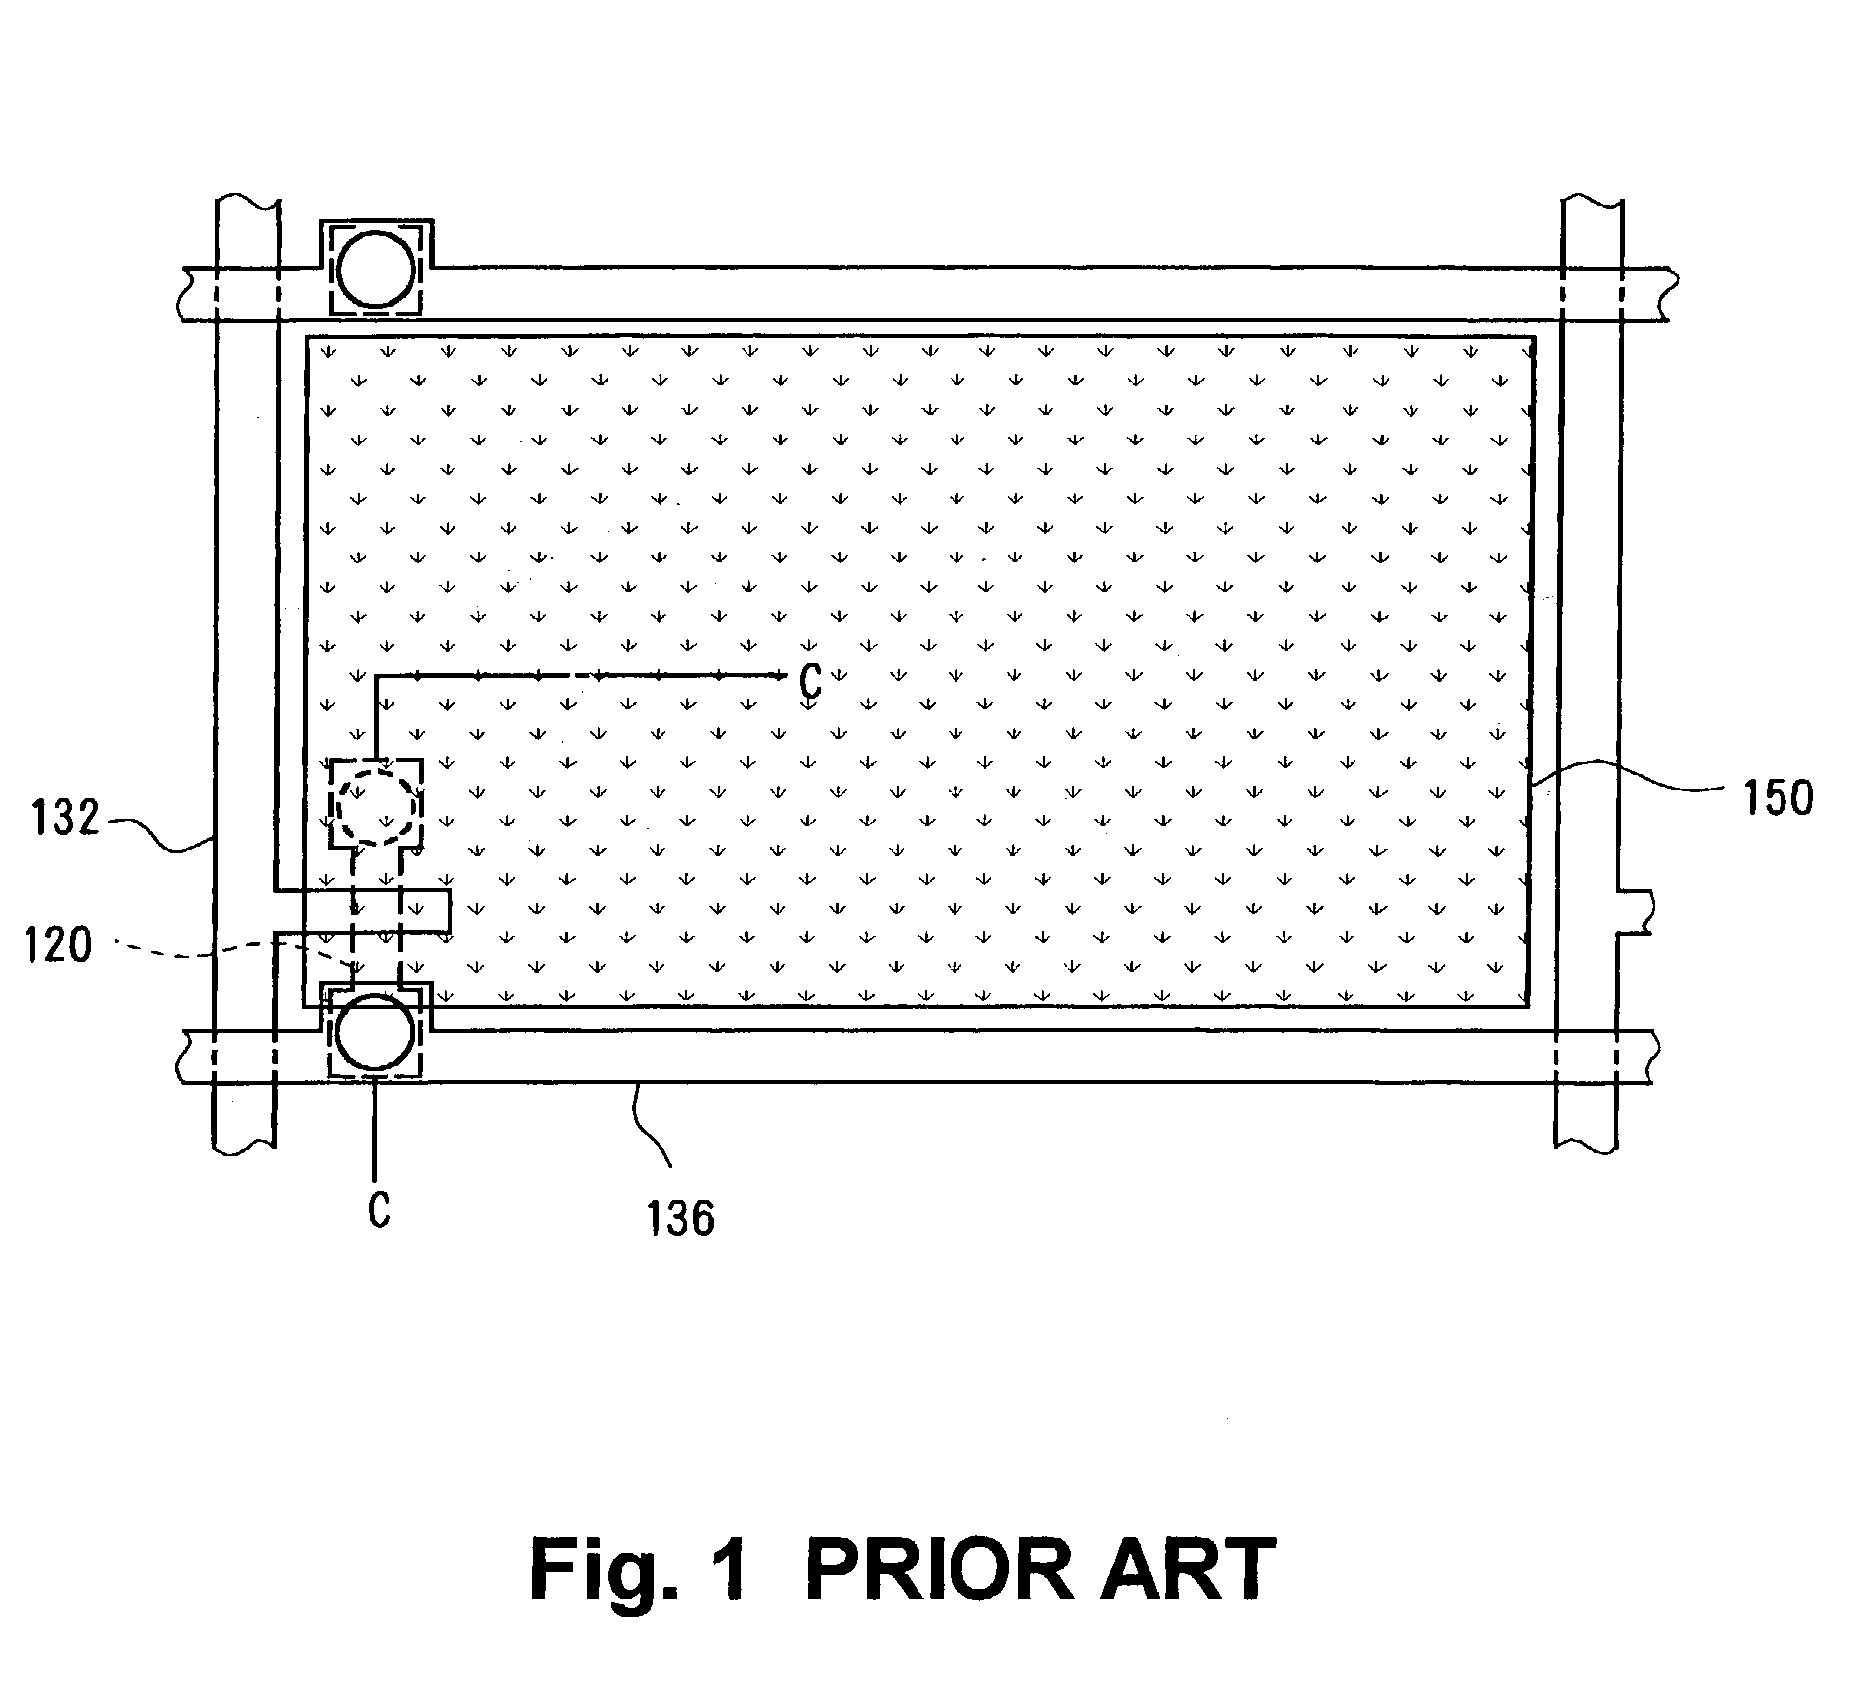 Liquid crystal display apparatus having a transparent layer covering a reflective layer